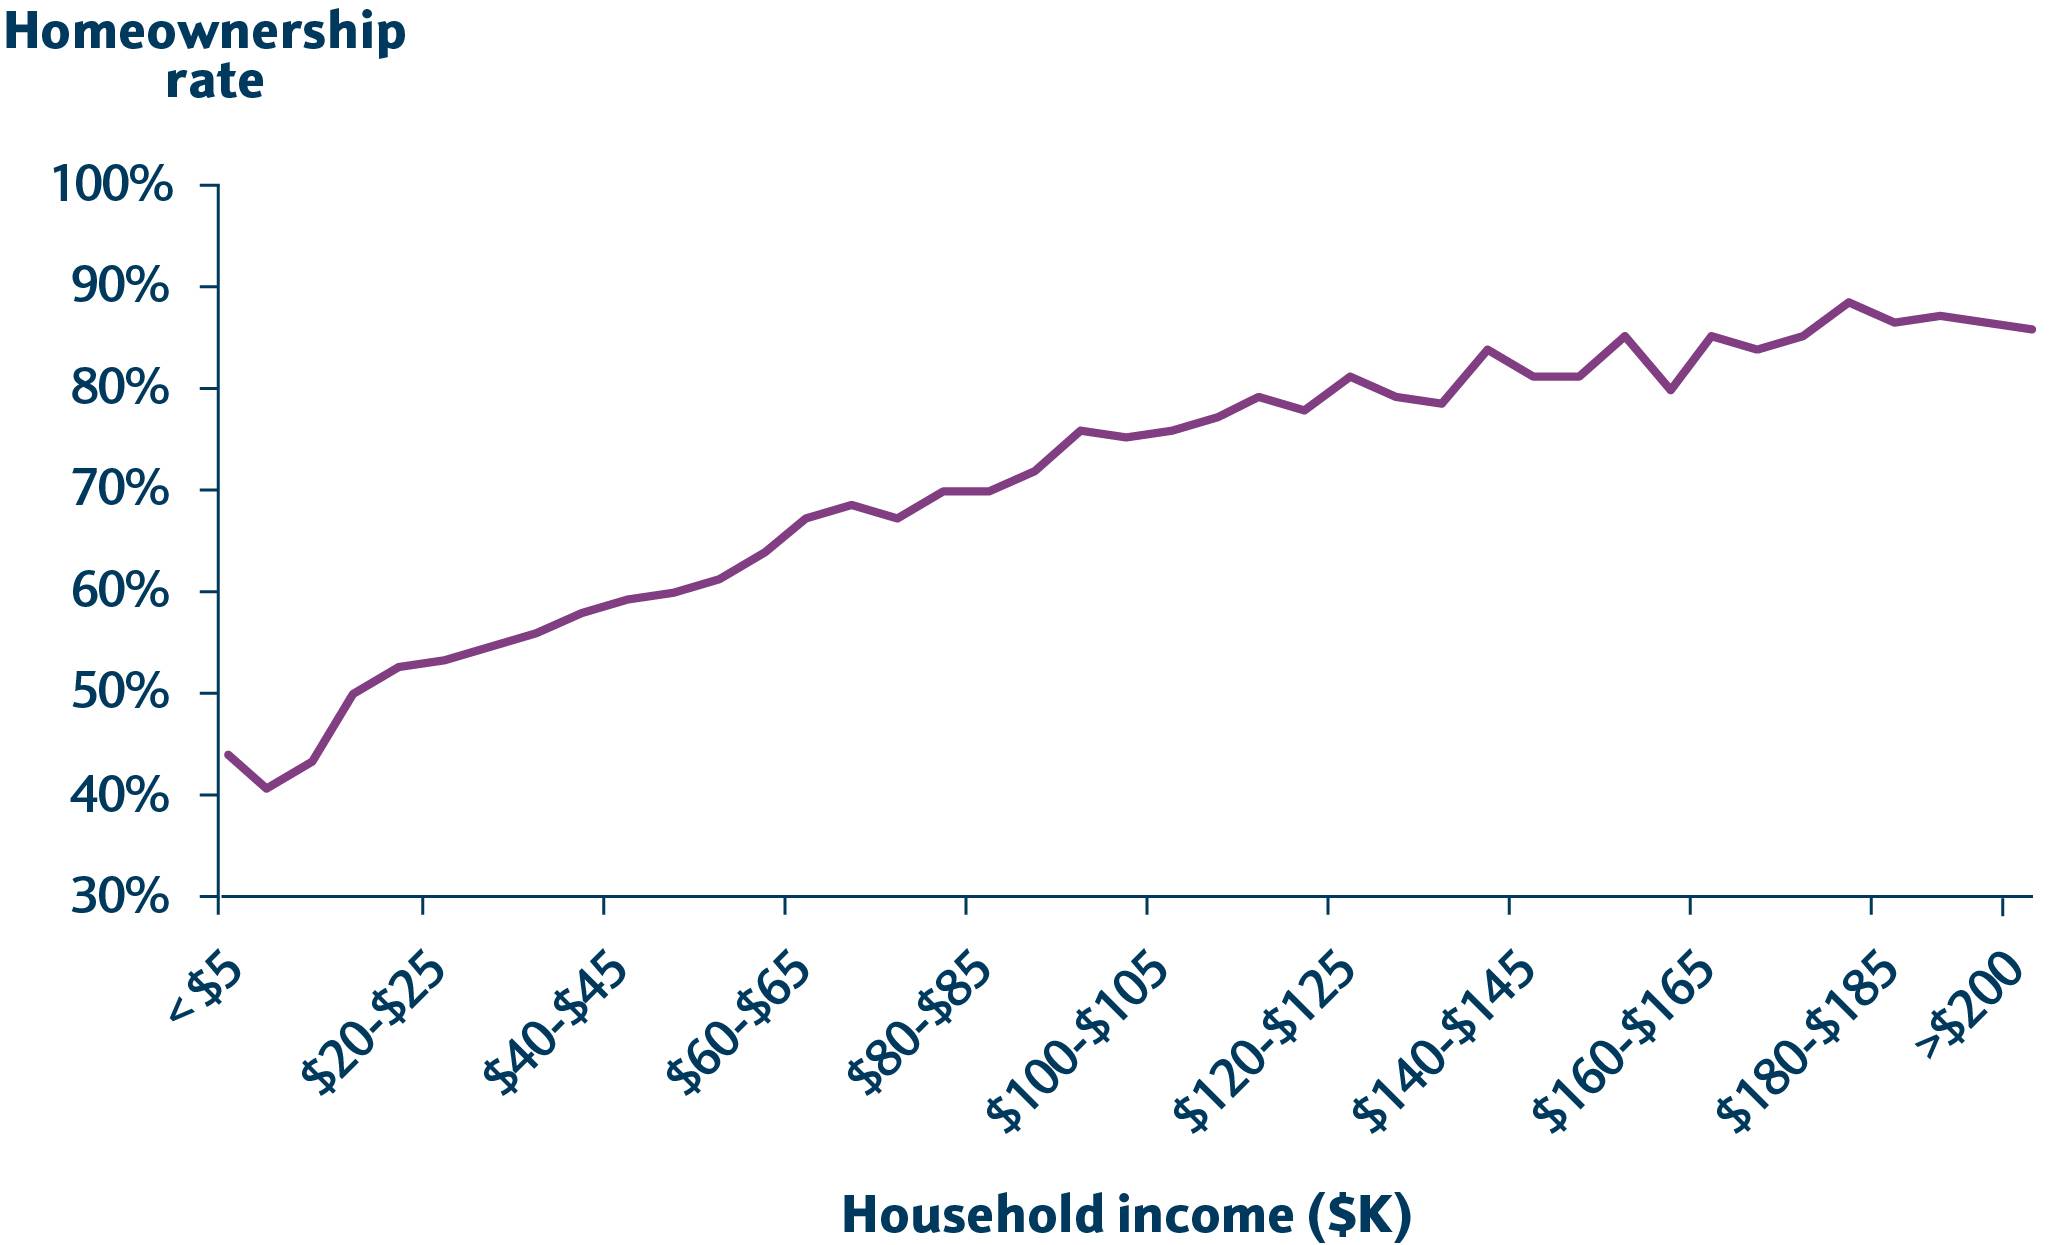 Line graph showing homeownership rate across income groups